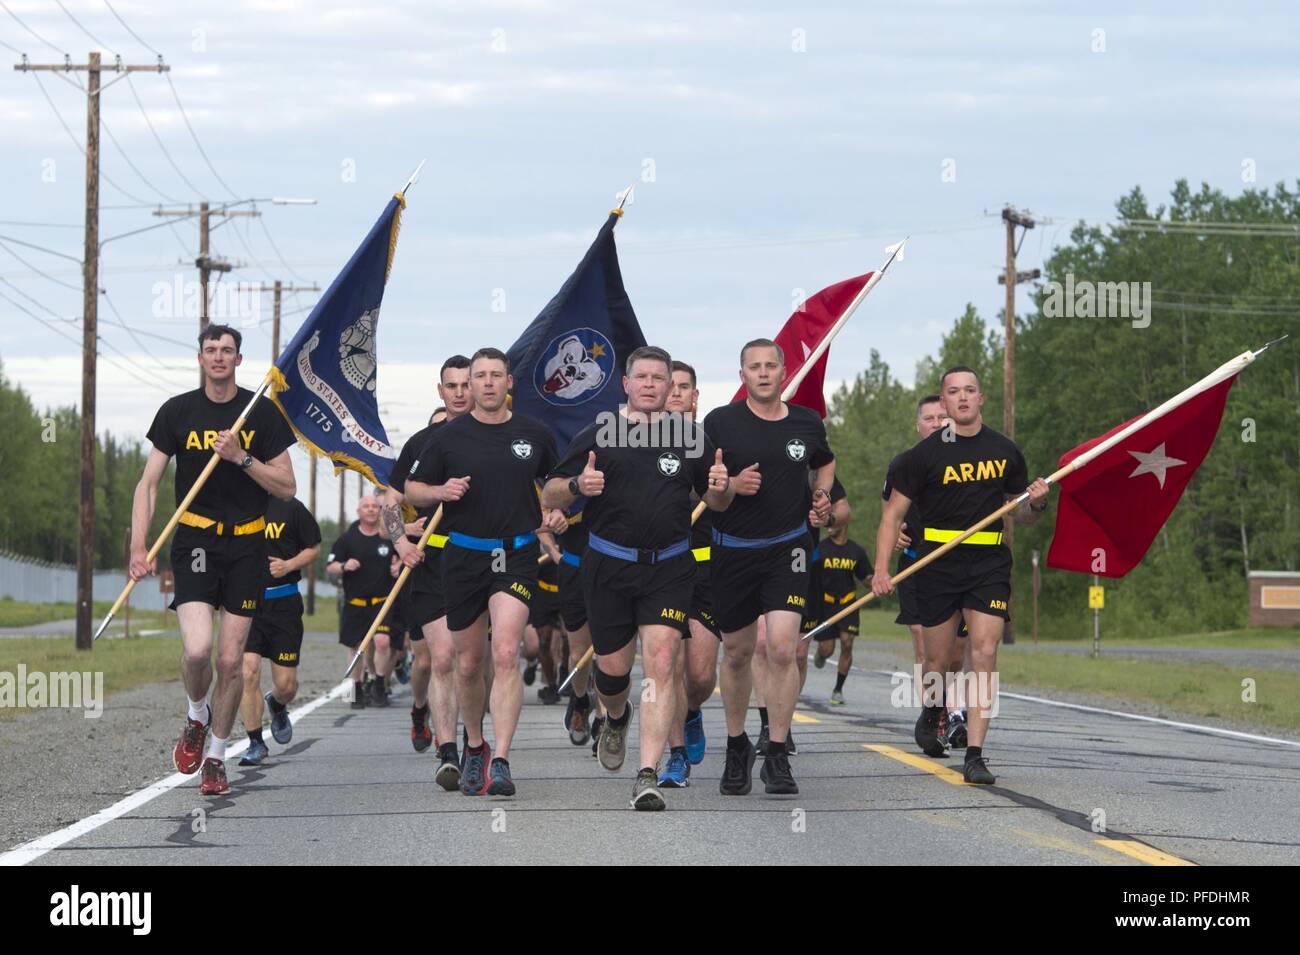 U.S. Army Alaska Commanding General, Maj. Gen. Mark J. O’Neil, center, leads the Soldiers of USARAK on a large formation run celebrating the Army’s 243rd birthday at Joint Base Elmendorf-Richardson, Alaska, June 13, 2018. Following the run the USARAK commanding general and command sergeant major cut a birthday cake with the youngest and oldest Soldiers present at JBER. Stock Photo